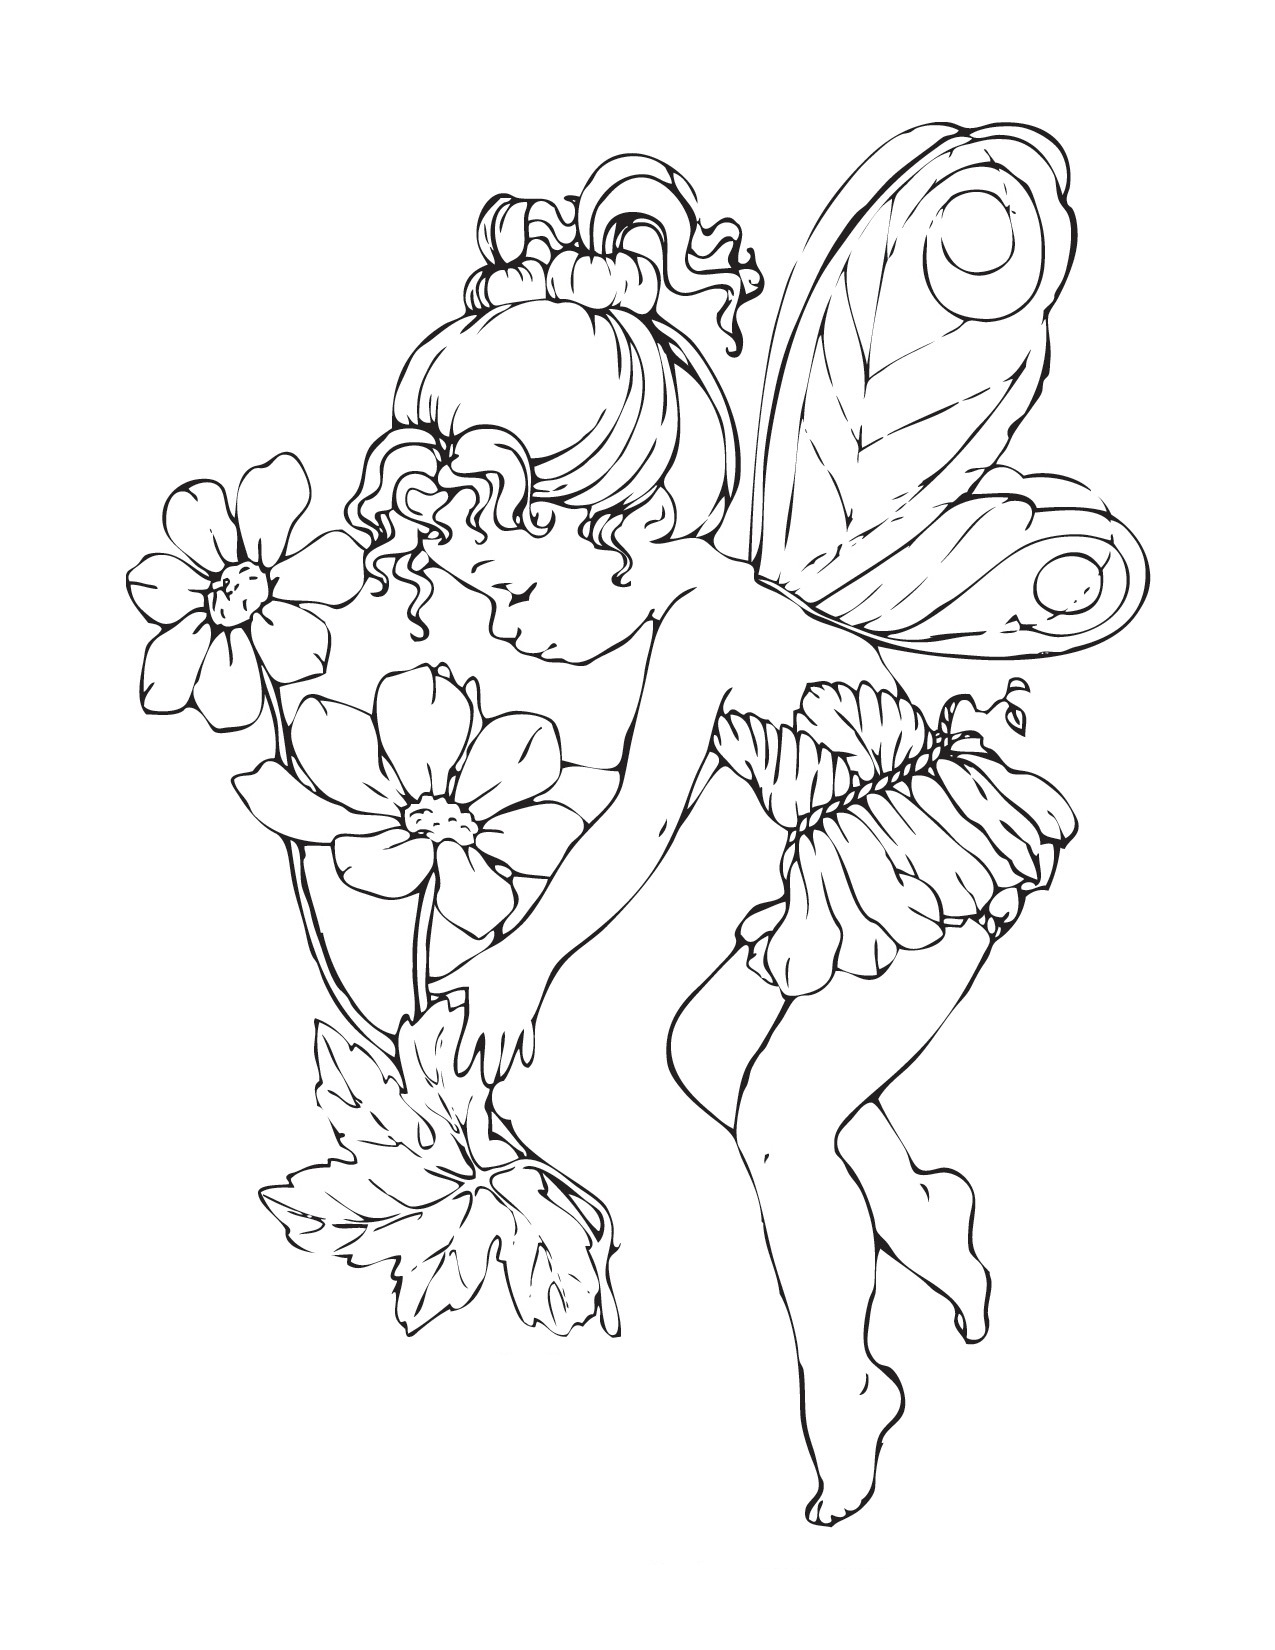 fairy-free-printable-coloring-pages-customize-and-print